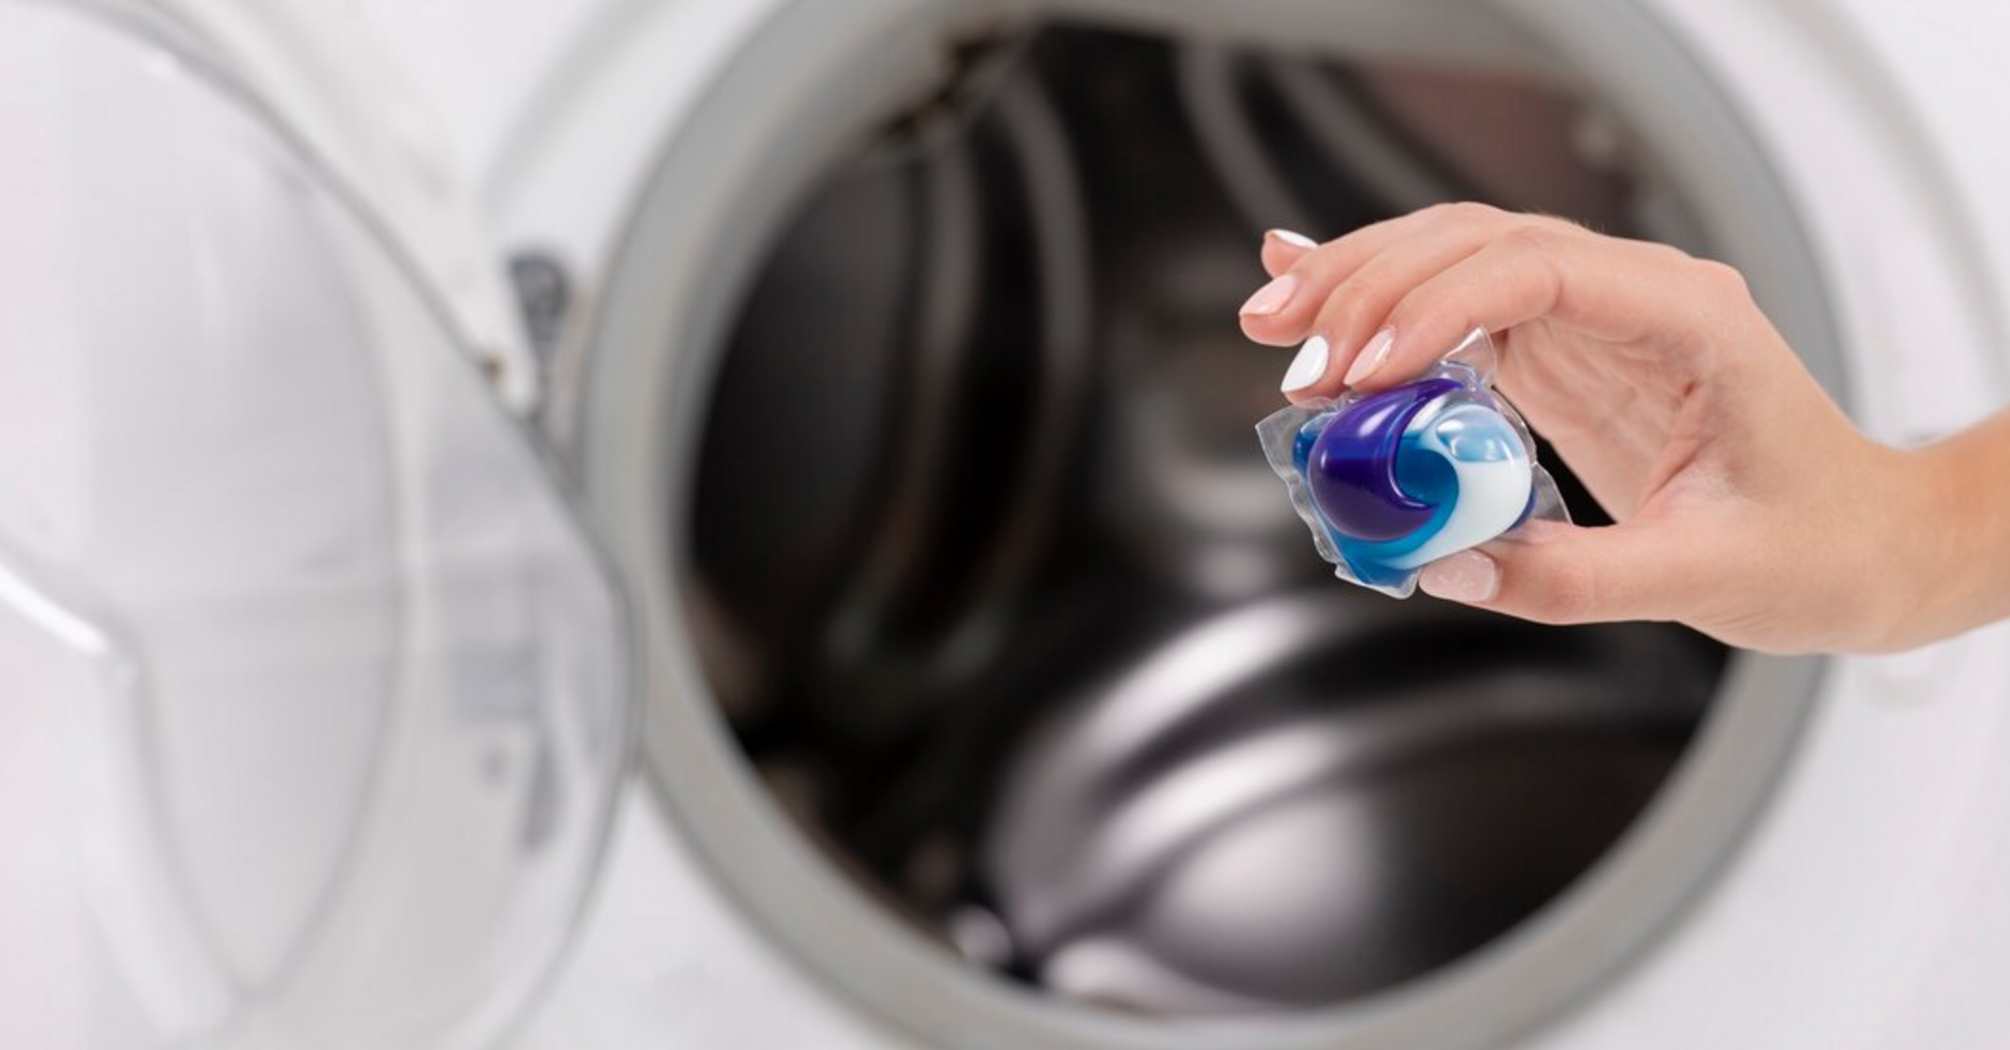 How to make your machine wash clothes better: the capsule trick